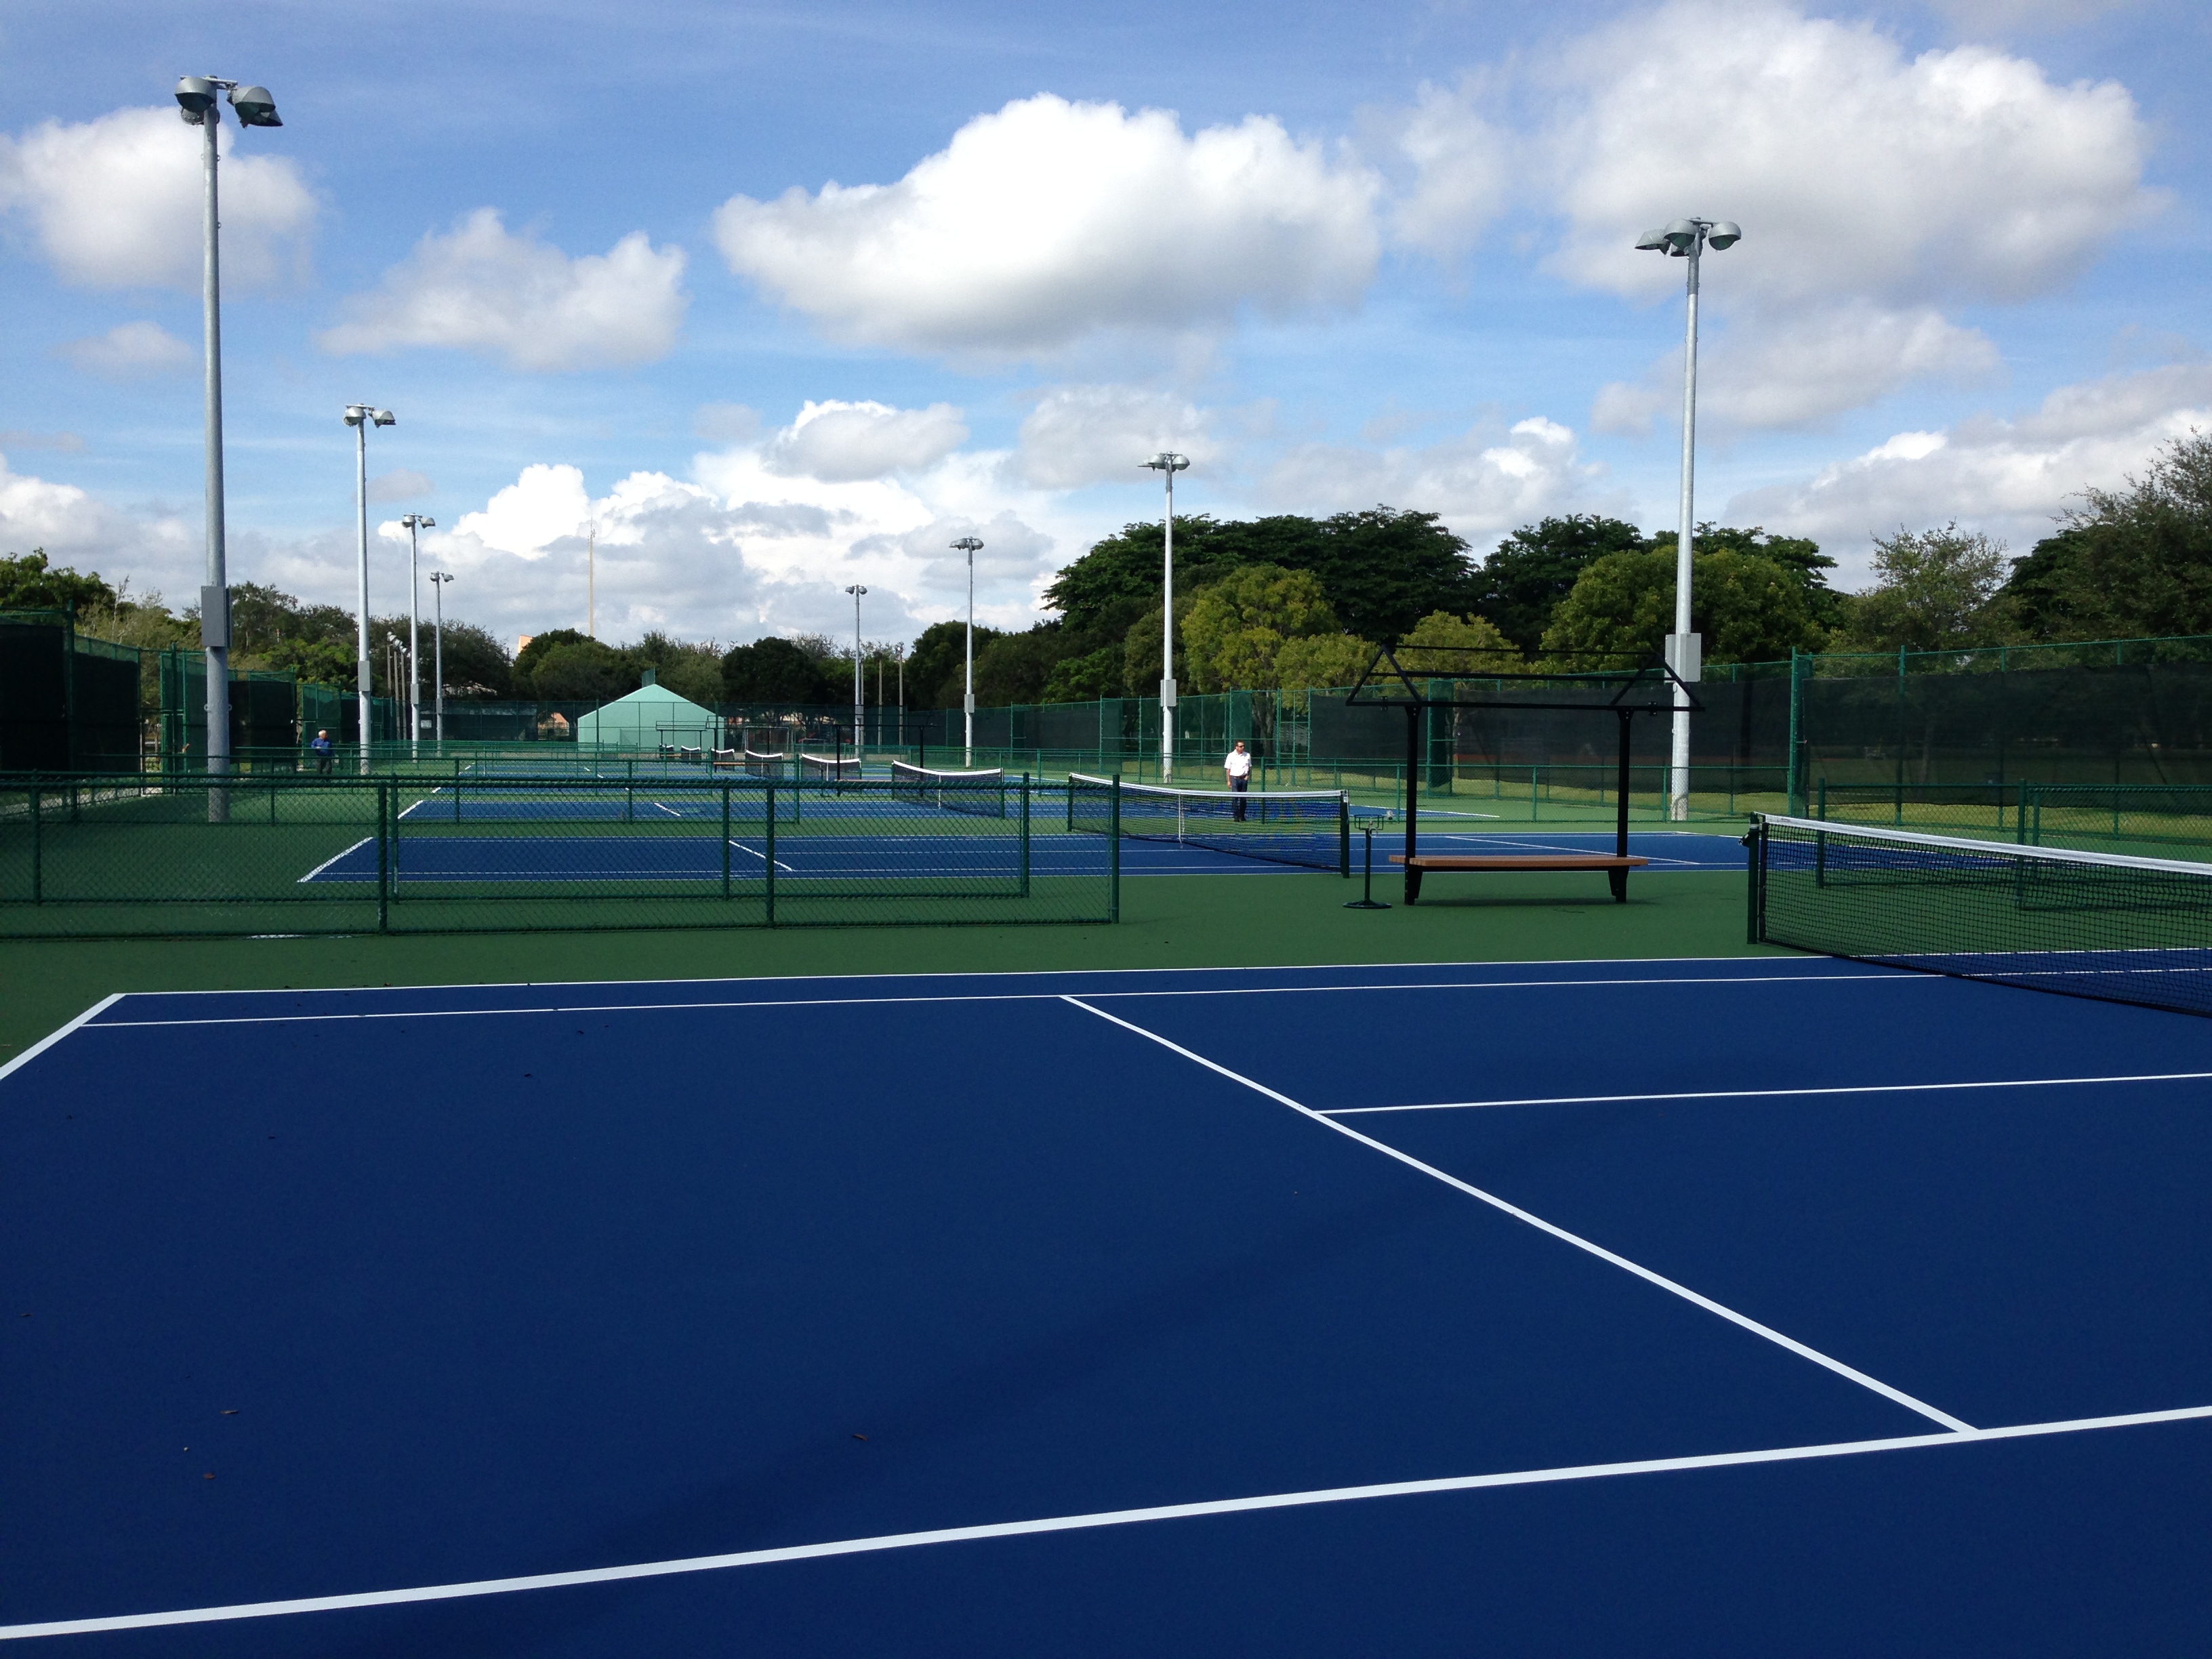 Laykold Masters Color tennis court surfacing over asphalt. - Surface ...